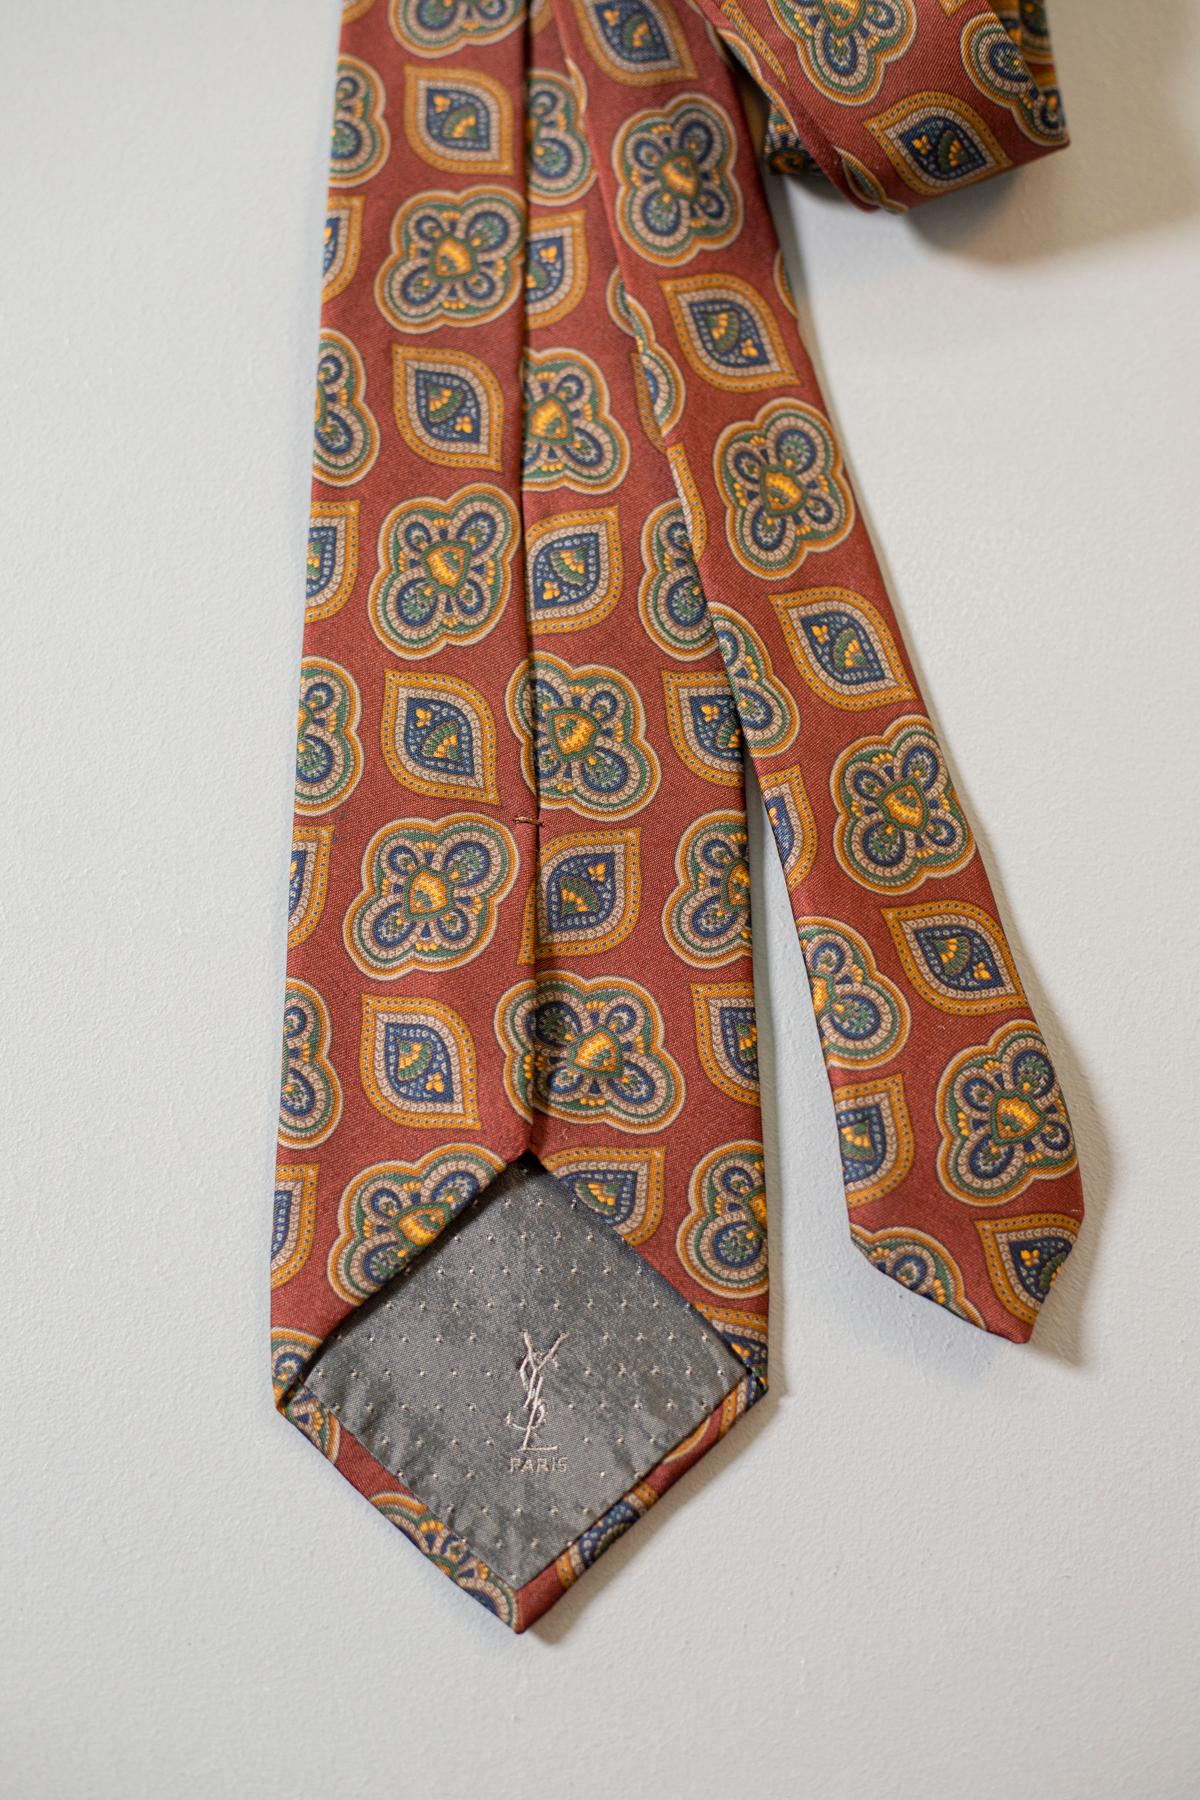 old fashioned tie